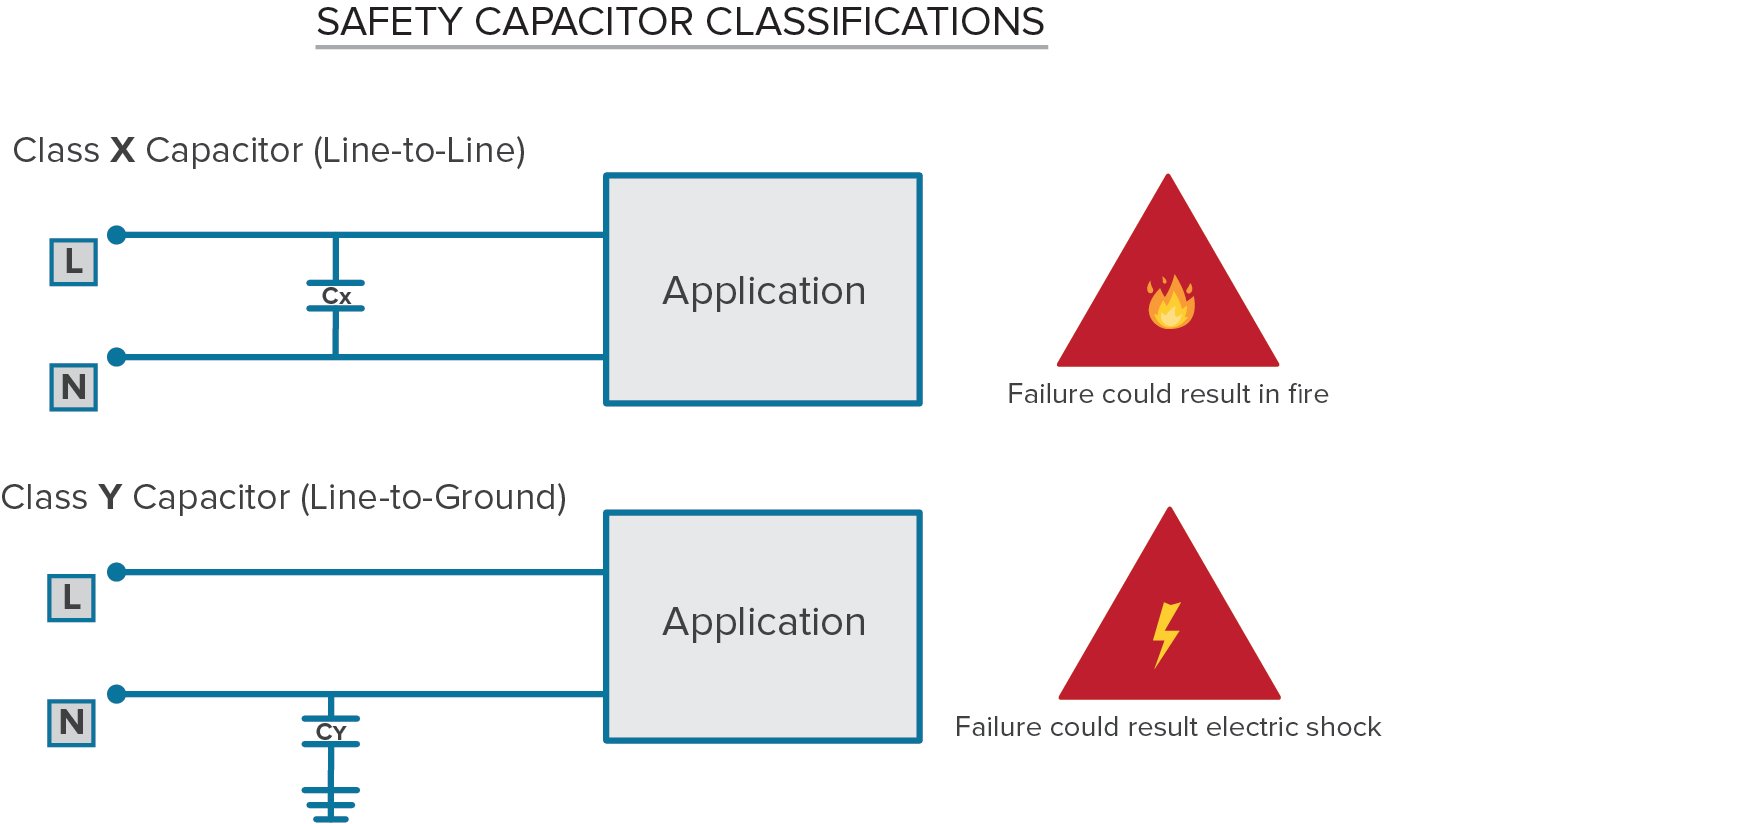 Safety Capacitor Classifications